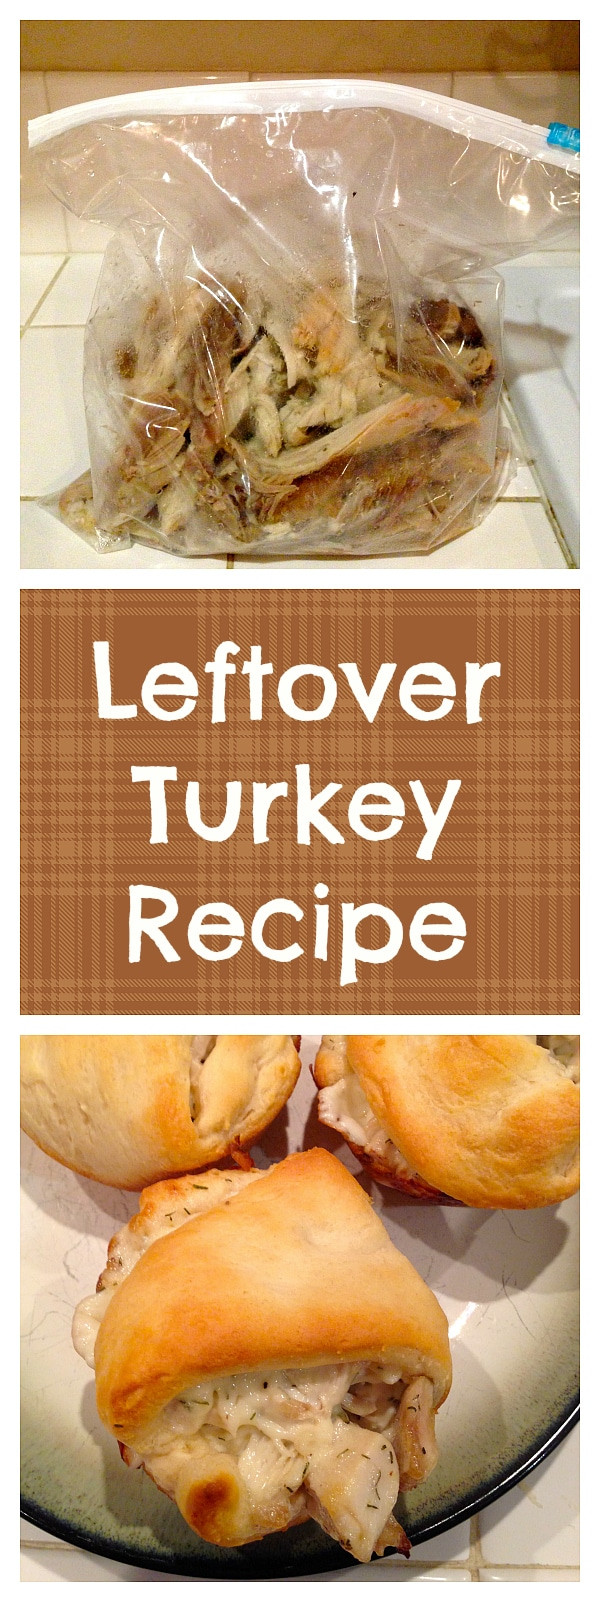 Leftover Thanksgiving Turkey
 Best Leftover Turkey Recipe · The Typical Mom